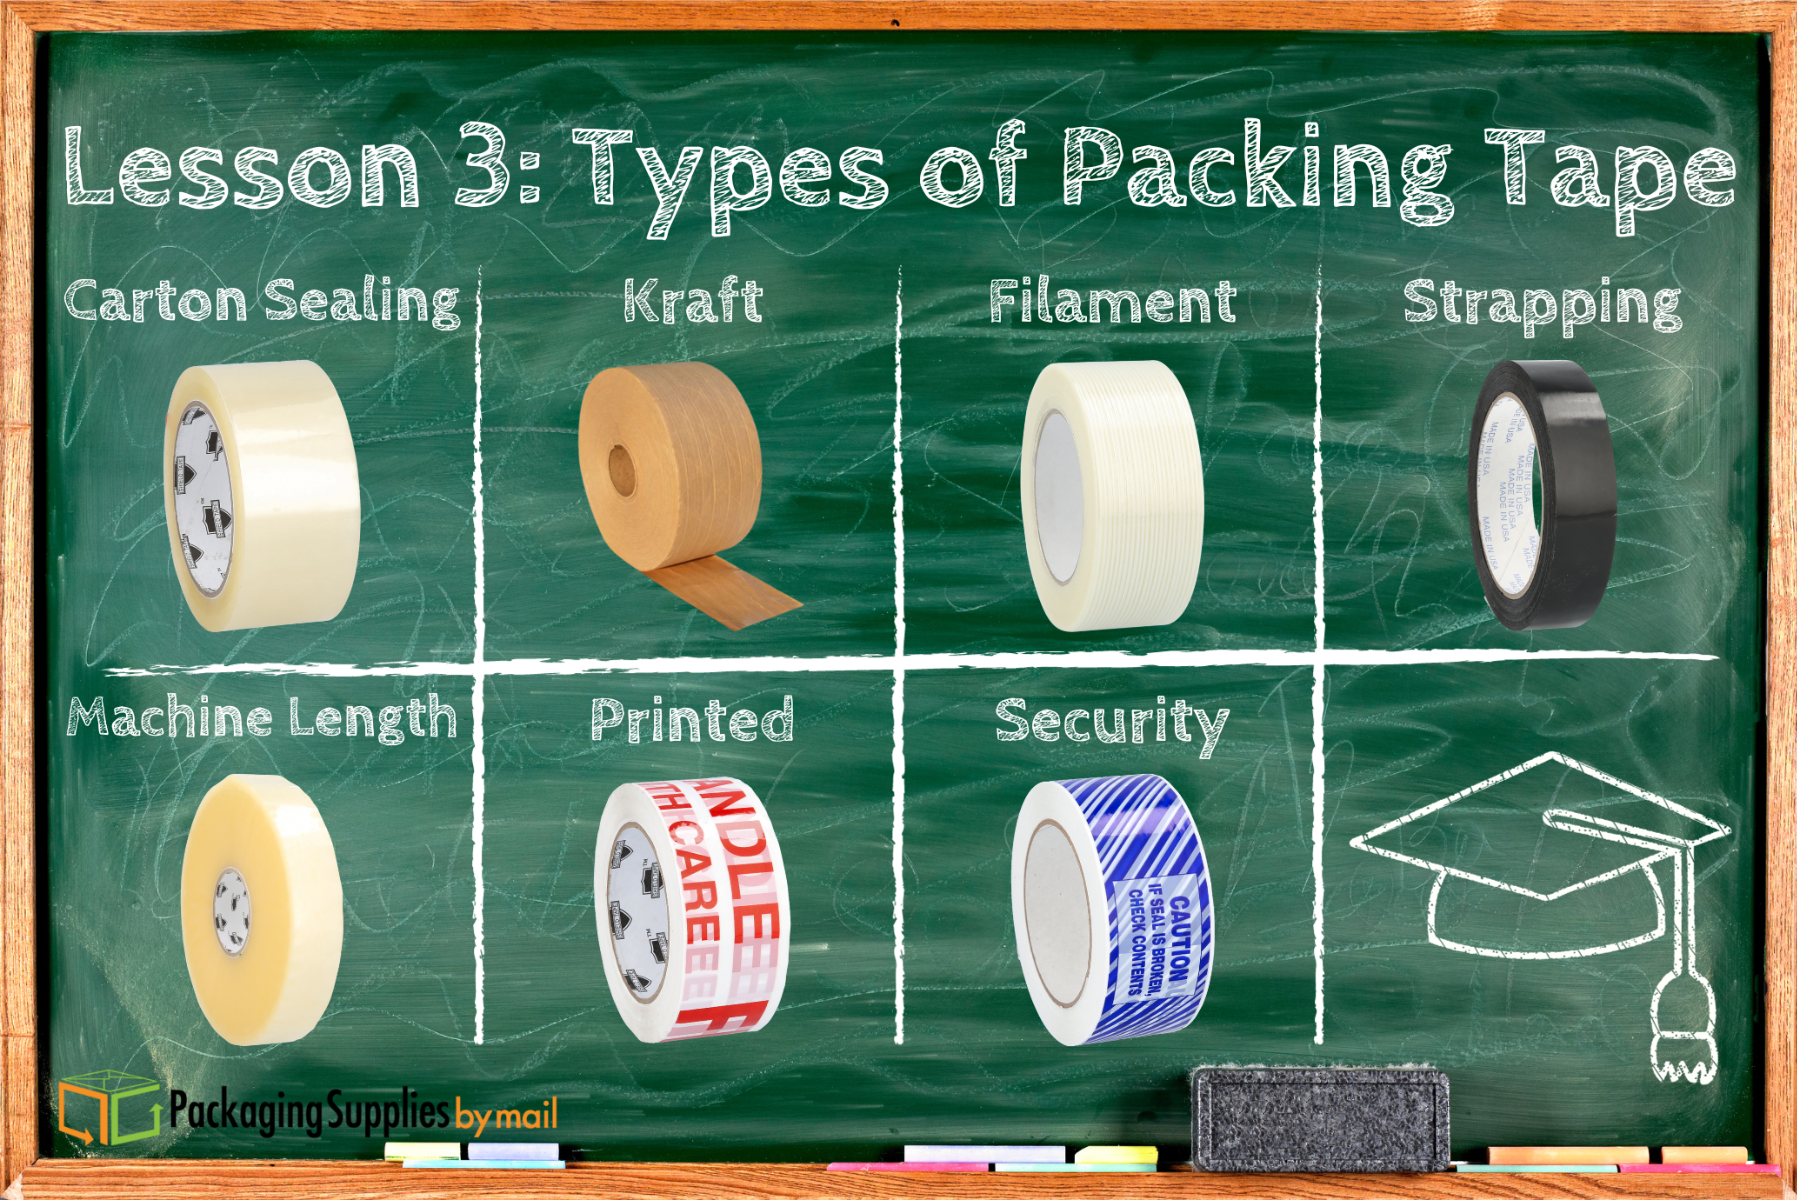 Lesson 3: Types of Packing Tape